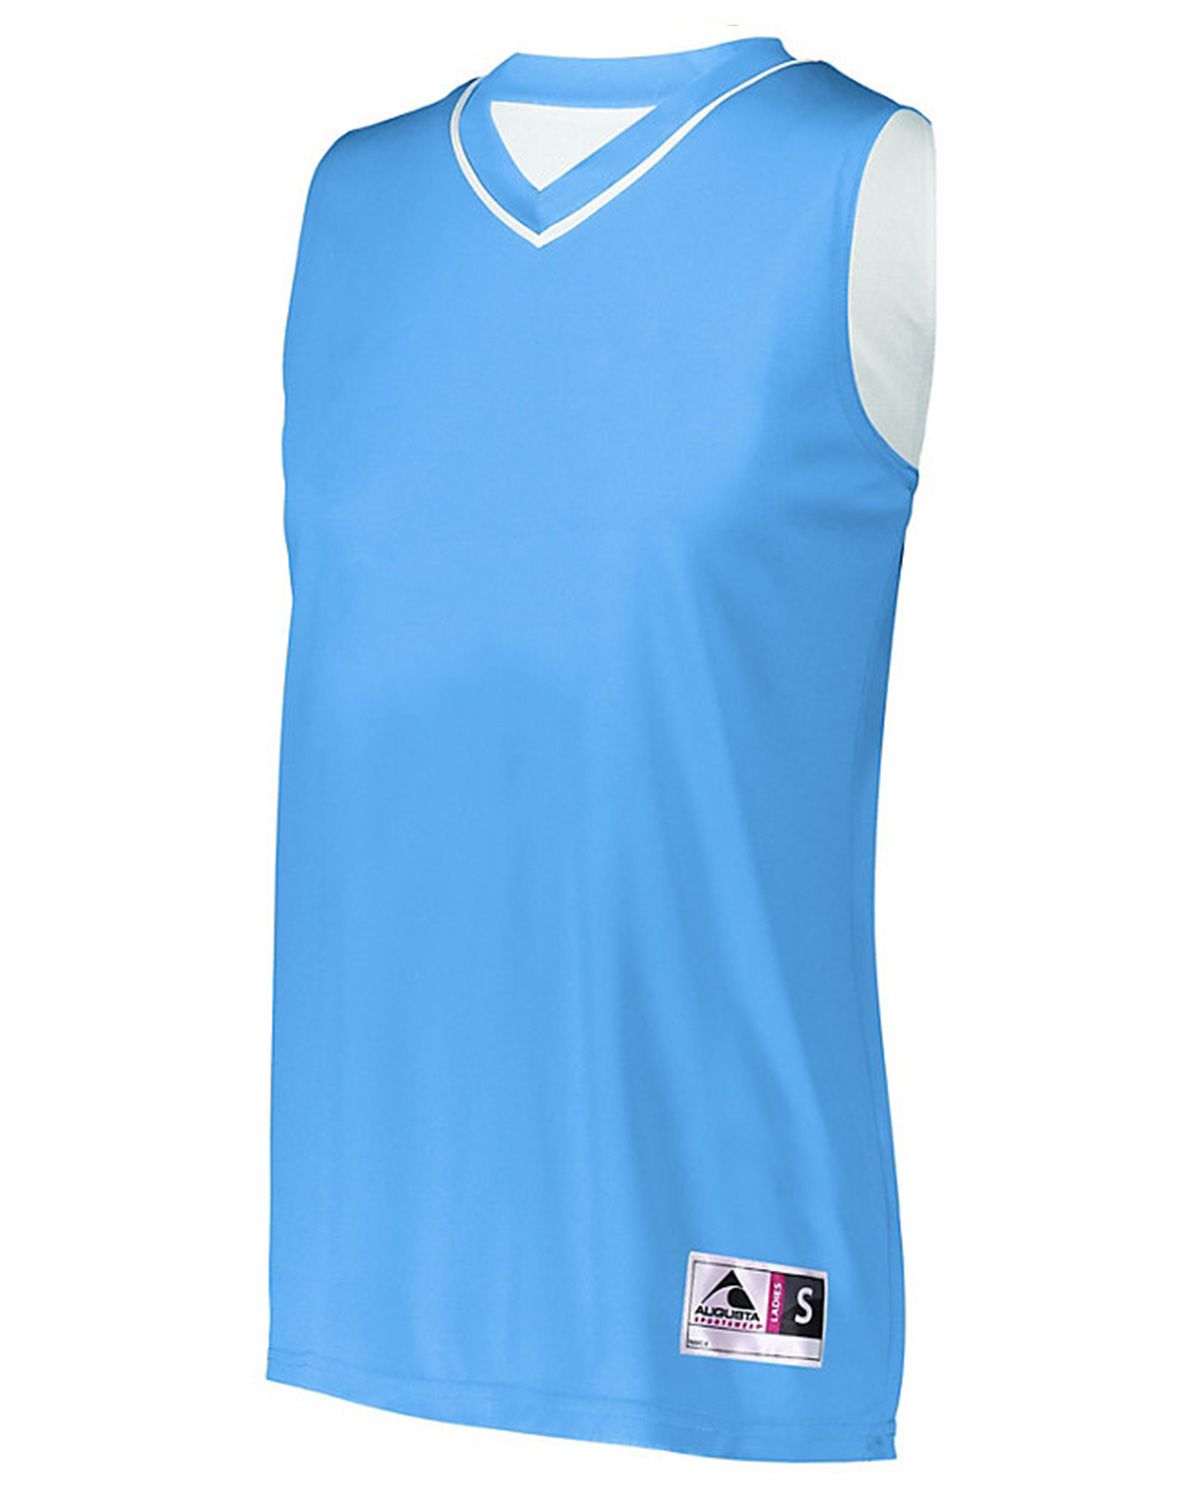 two color jersey